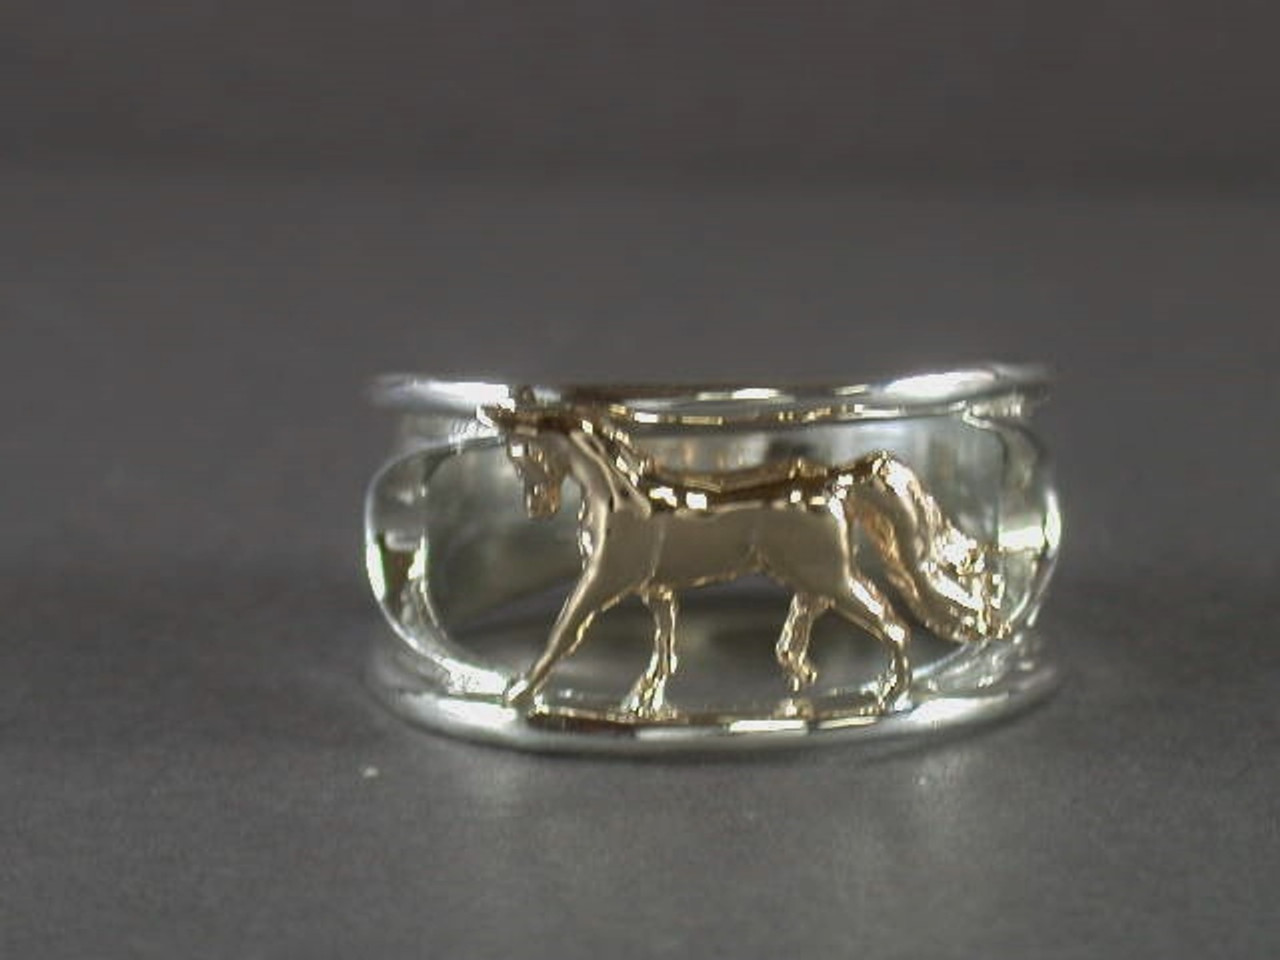 Ring Insert Band With Arabian Horse